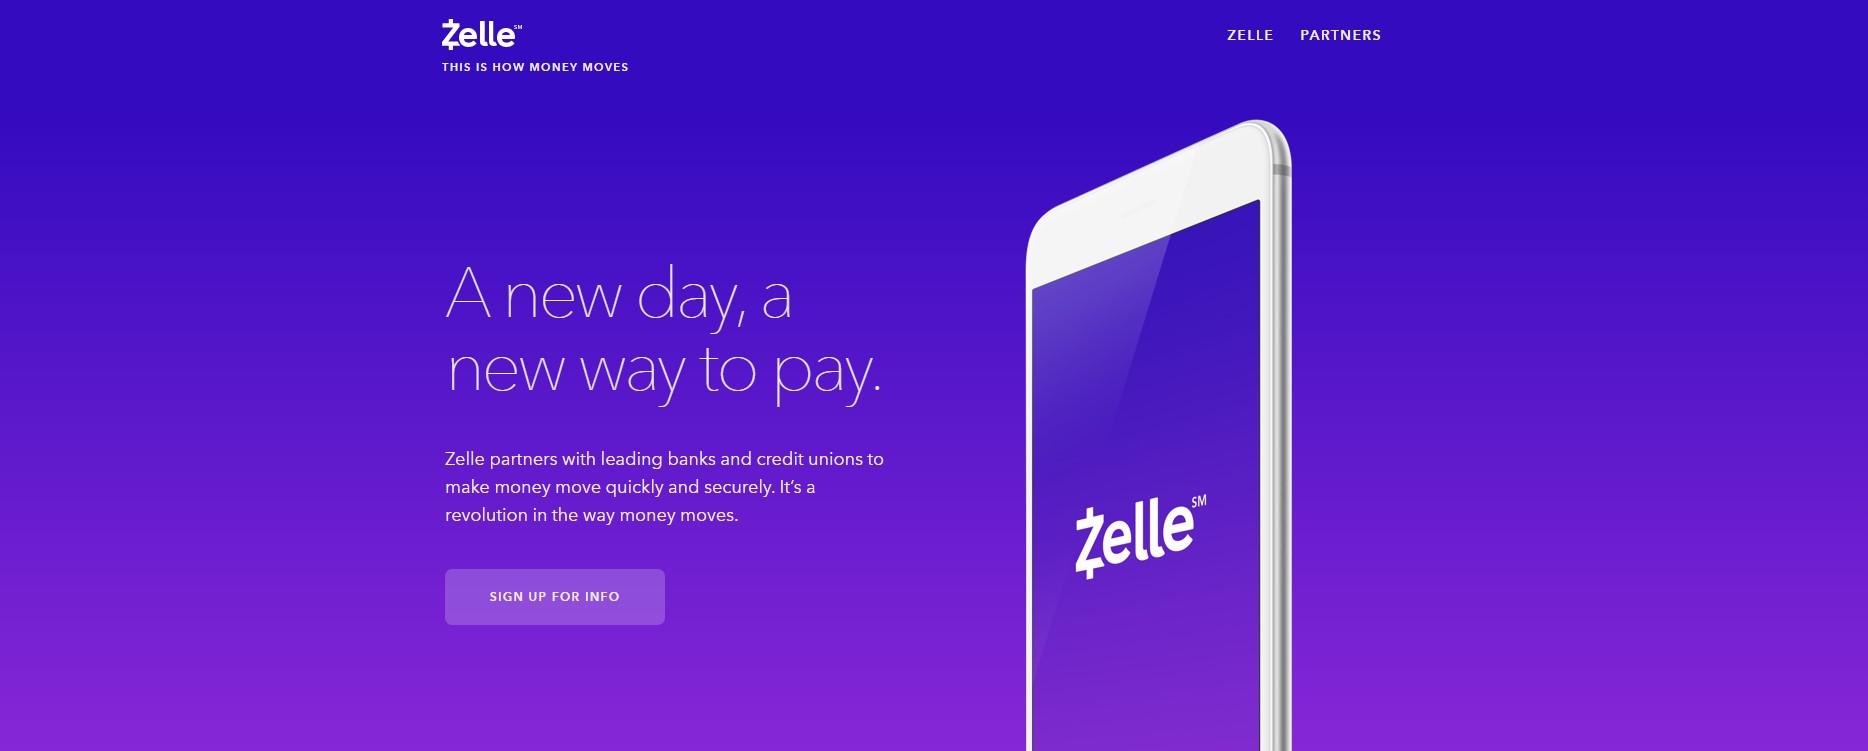 Zelle clearXchange Logo - U.S. Banks Band Up to Try Zelle, a New Real-Time Payments Solution